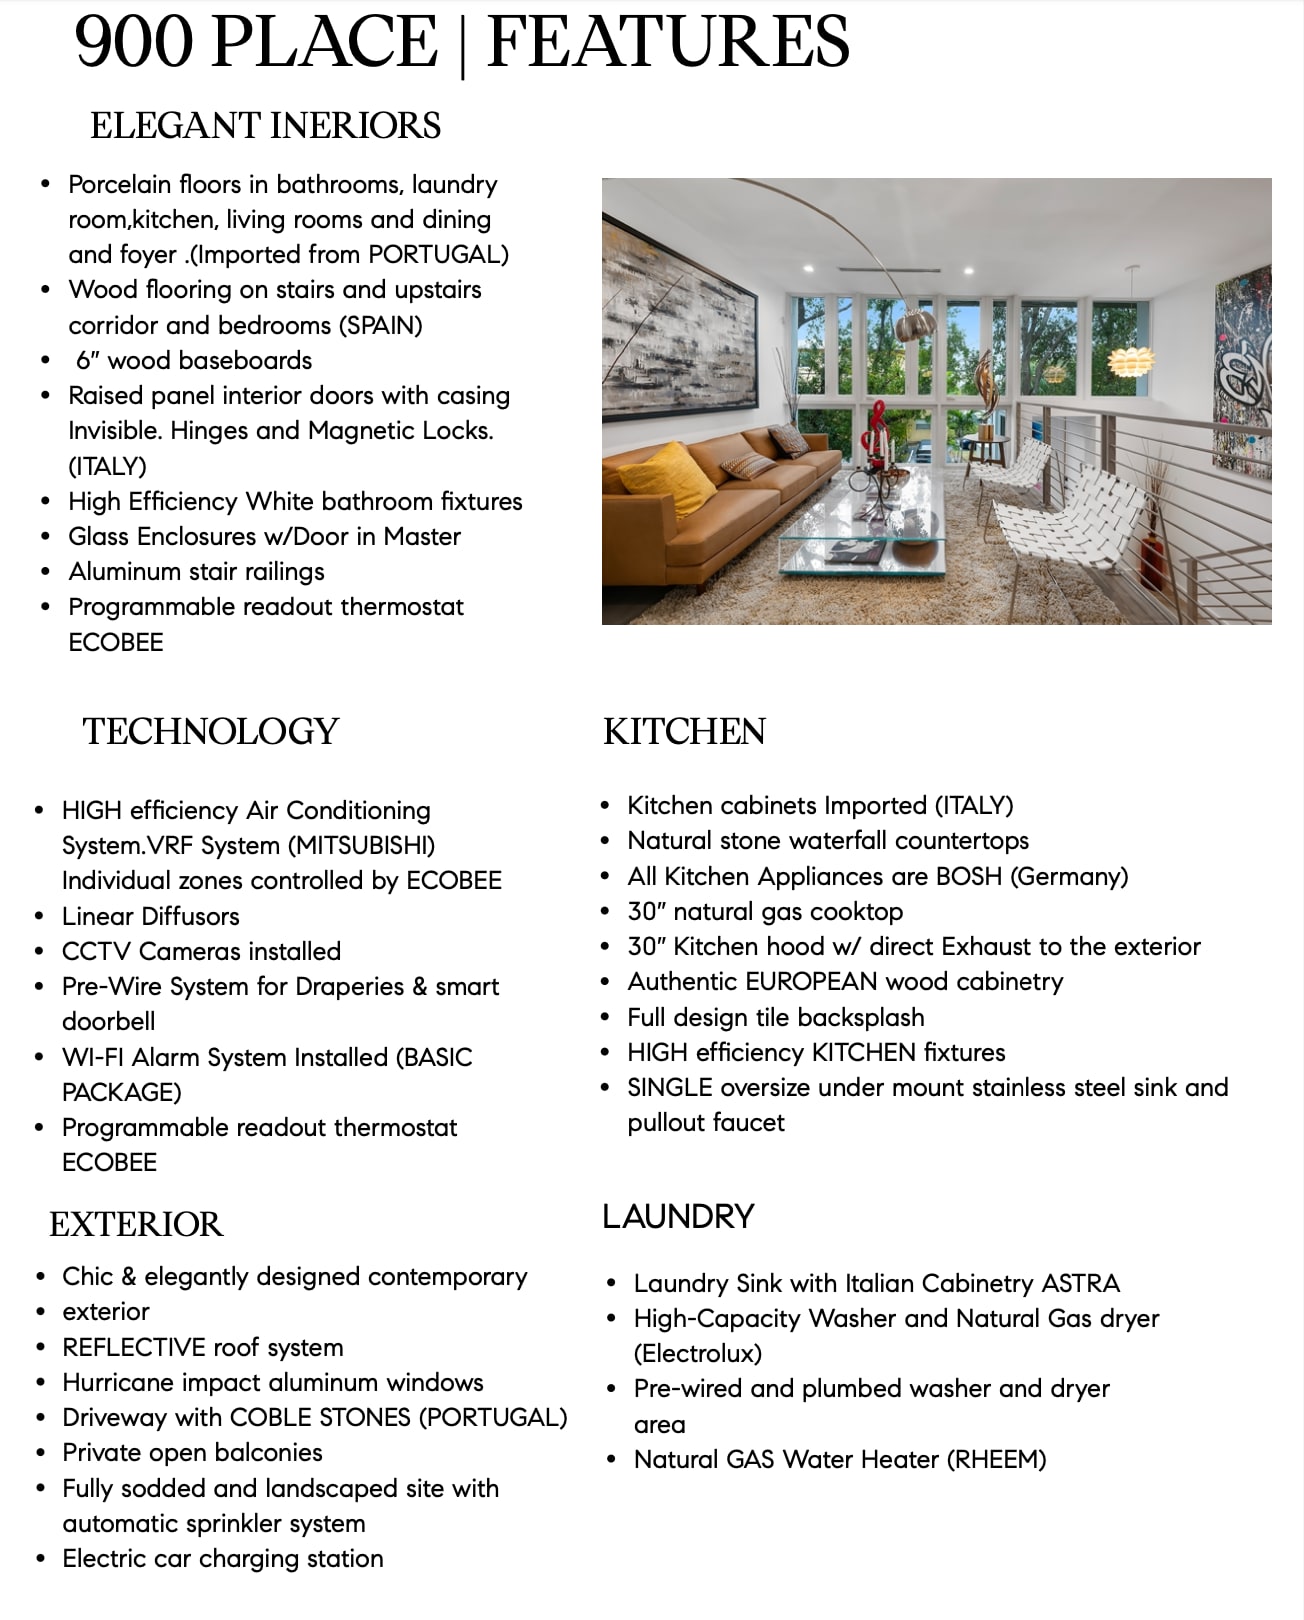 Features of 900 Place Residences in Fort Lauderdale